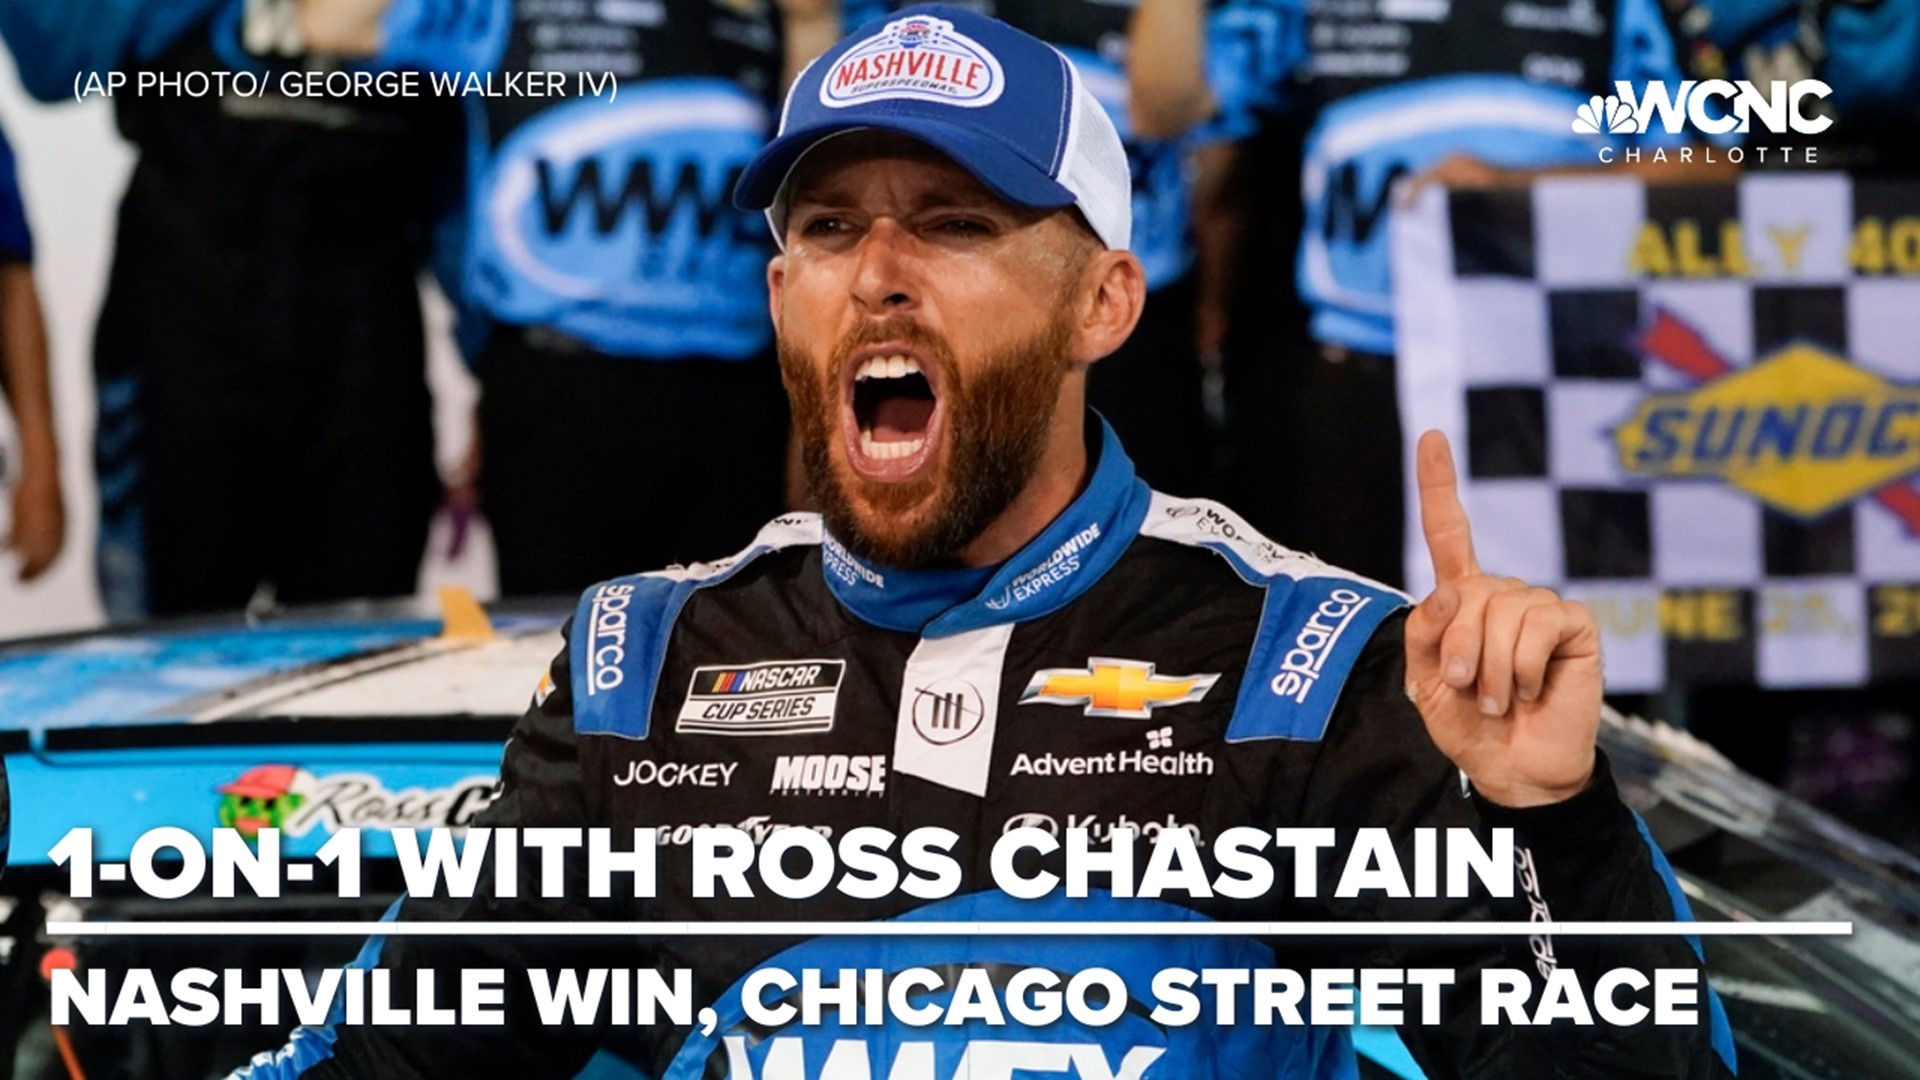 Ashley Strohelein discusses Chastain's win and how he's getting ready for a race in downtown Chicago.